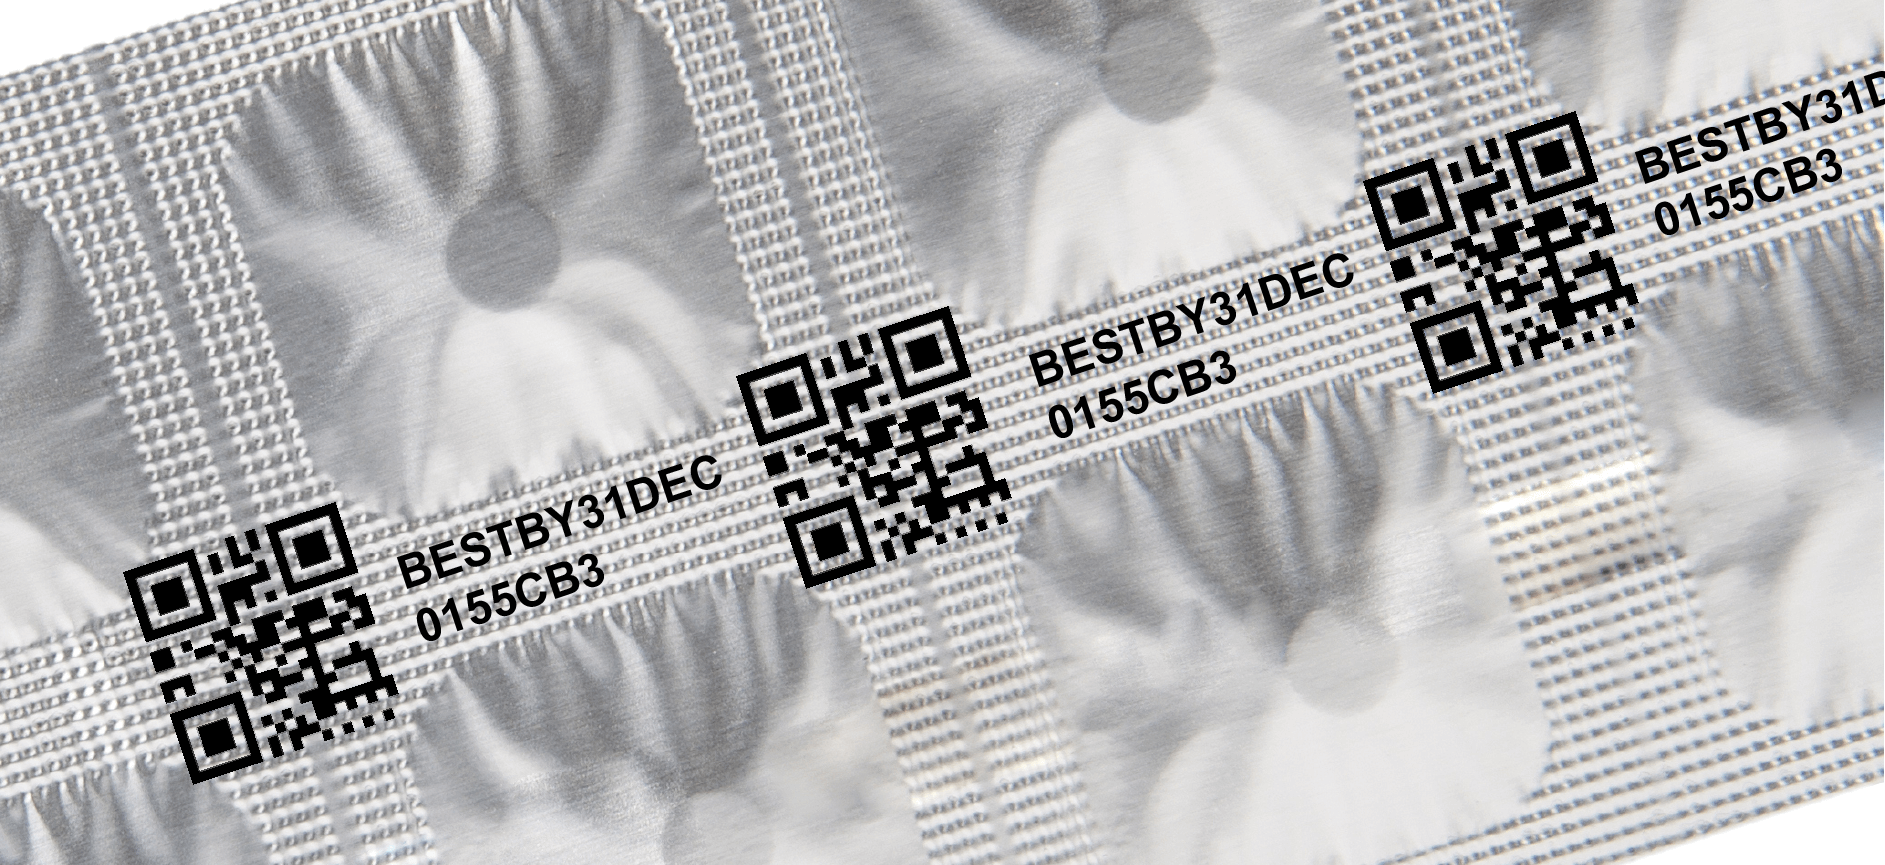 QR codes and expiration dates printed onto foil packaging